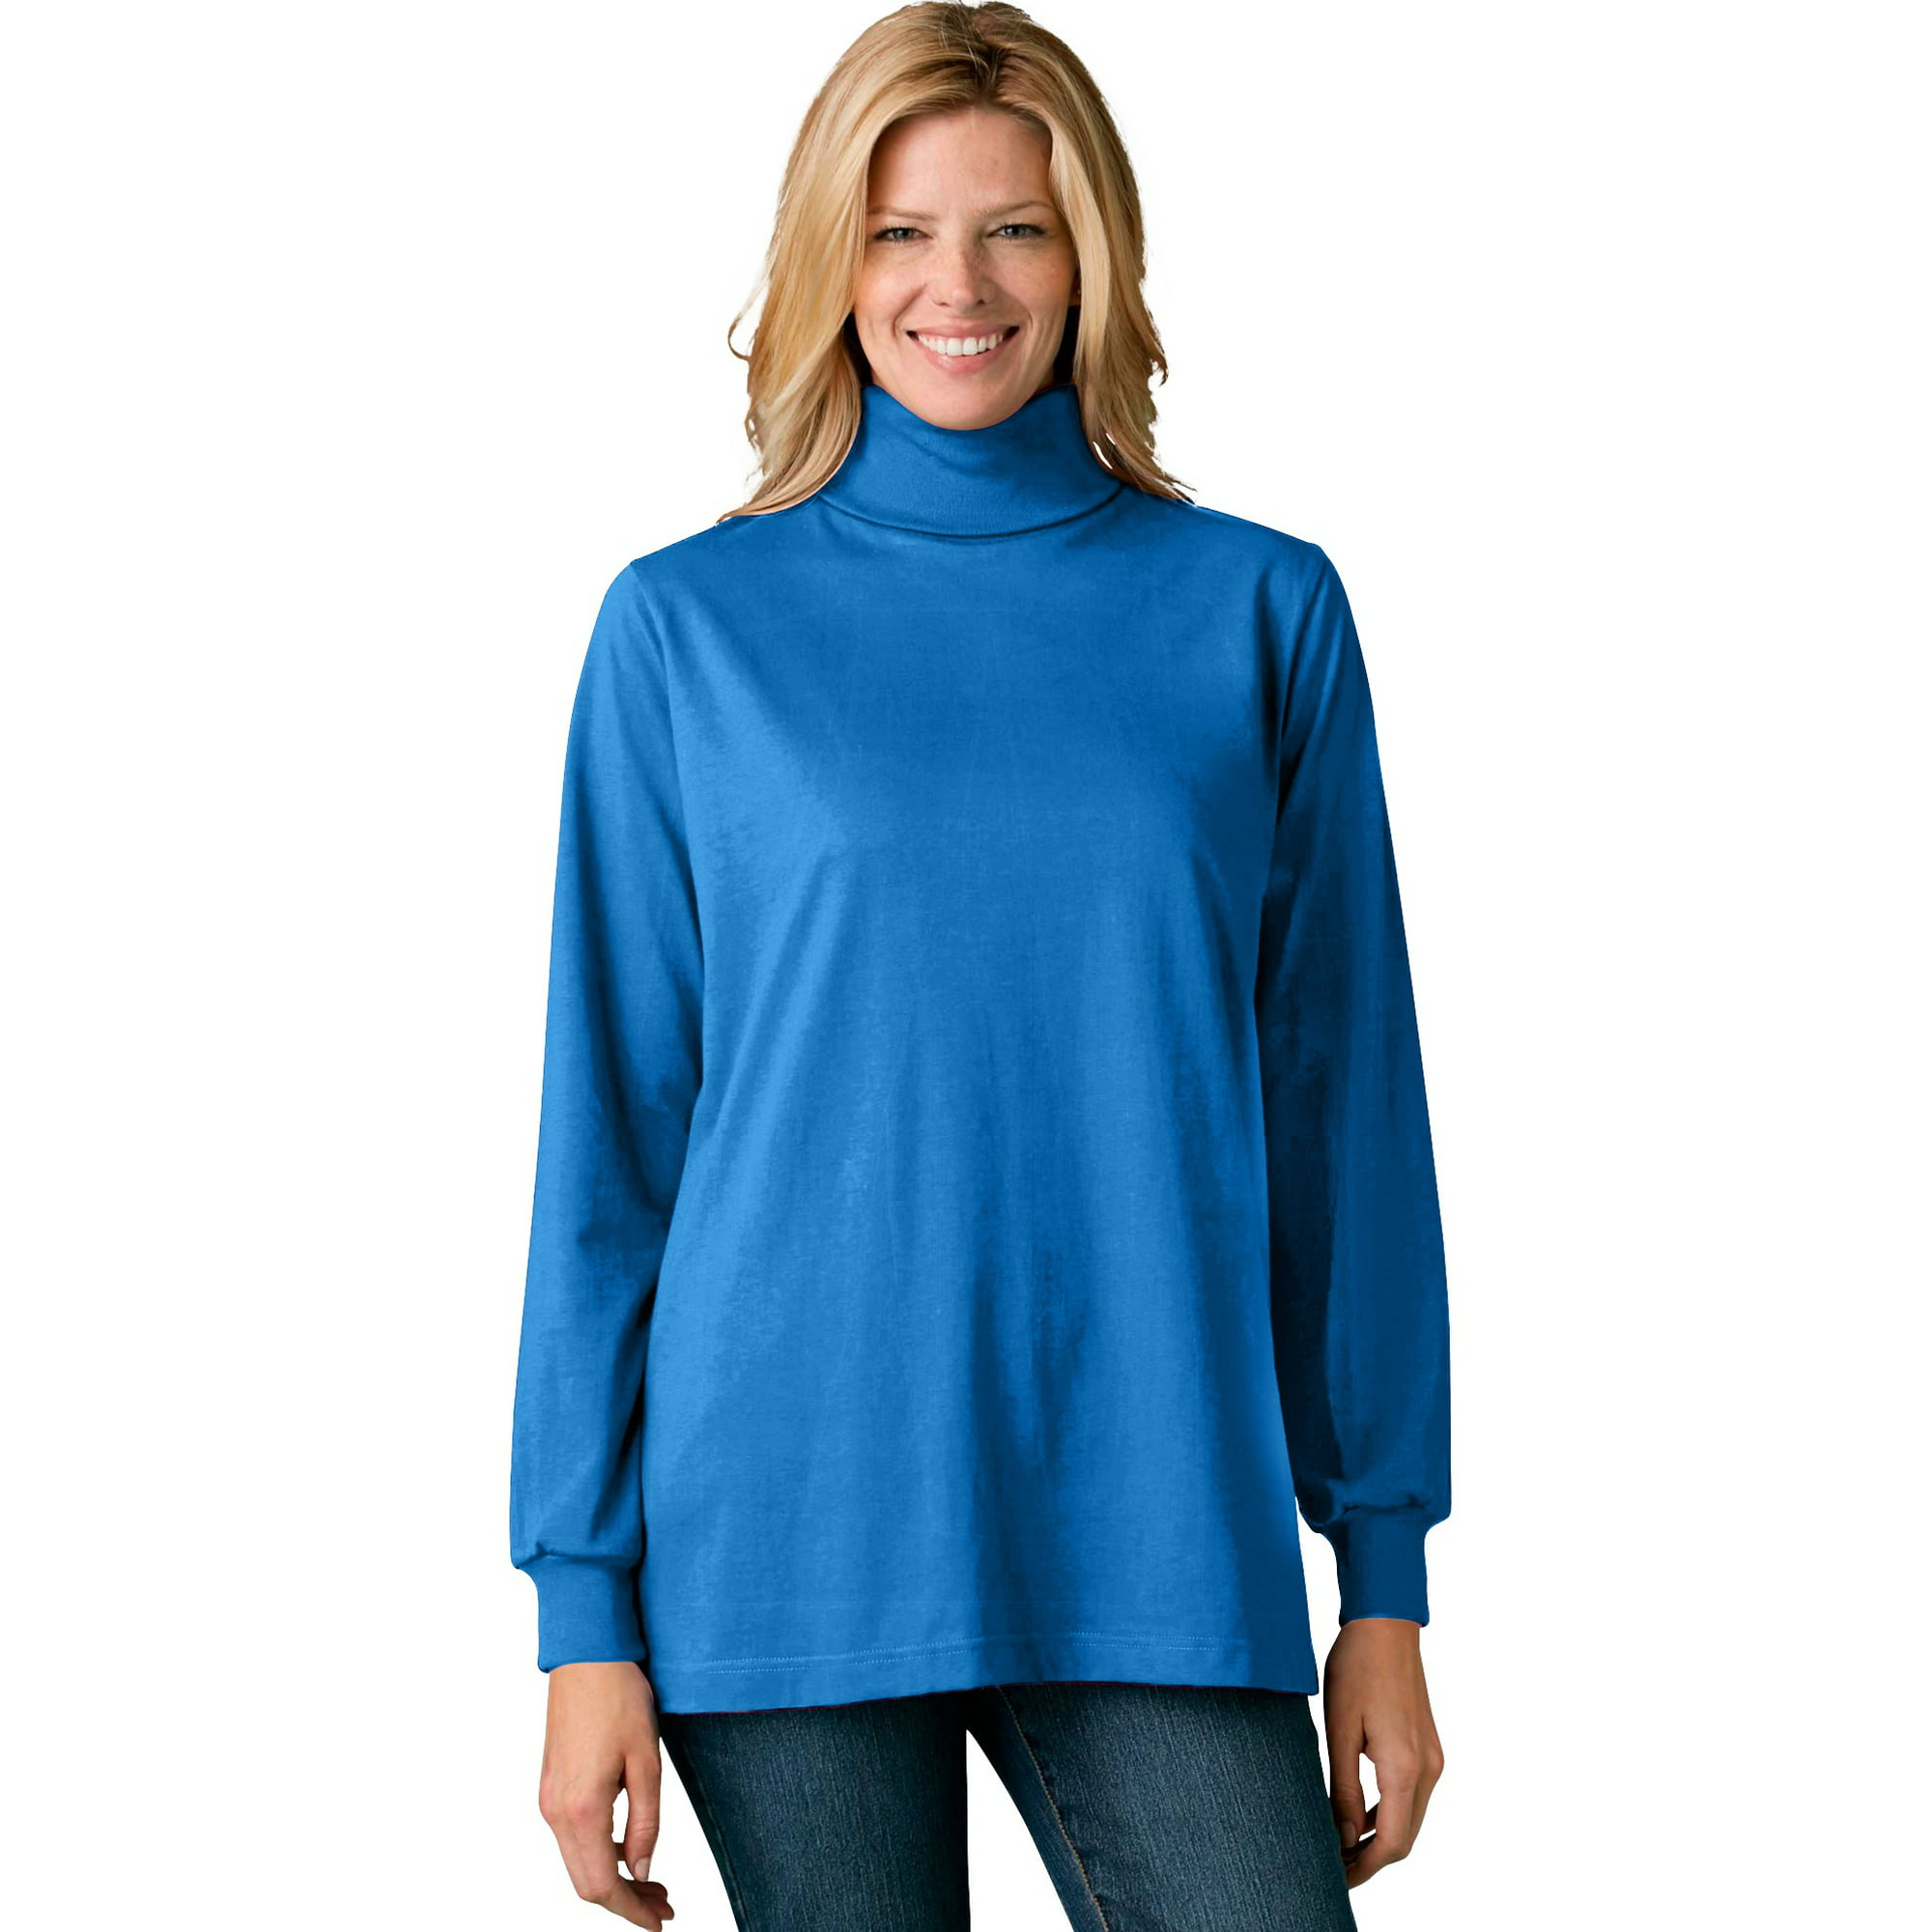 Plus Size Women's Perfect Long-Sleeve Turtleneck Tee by Woman Within in Black (Size 4X)